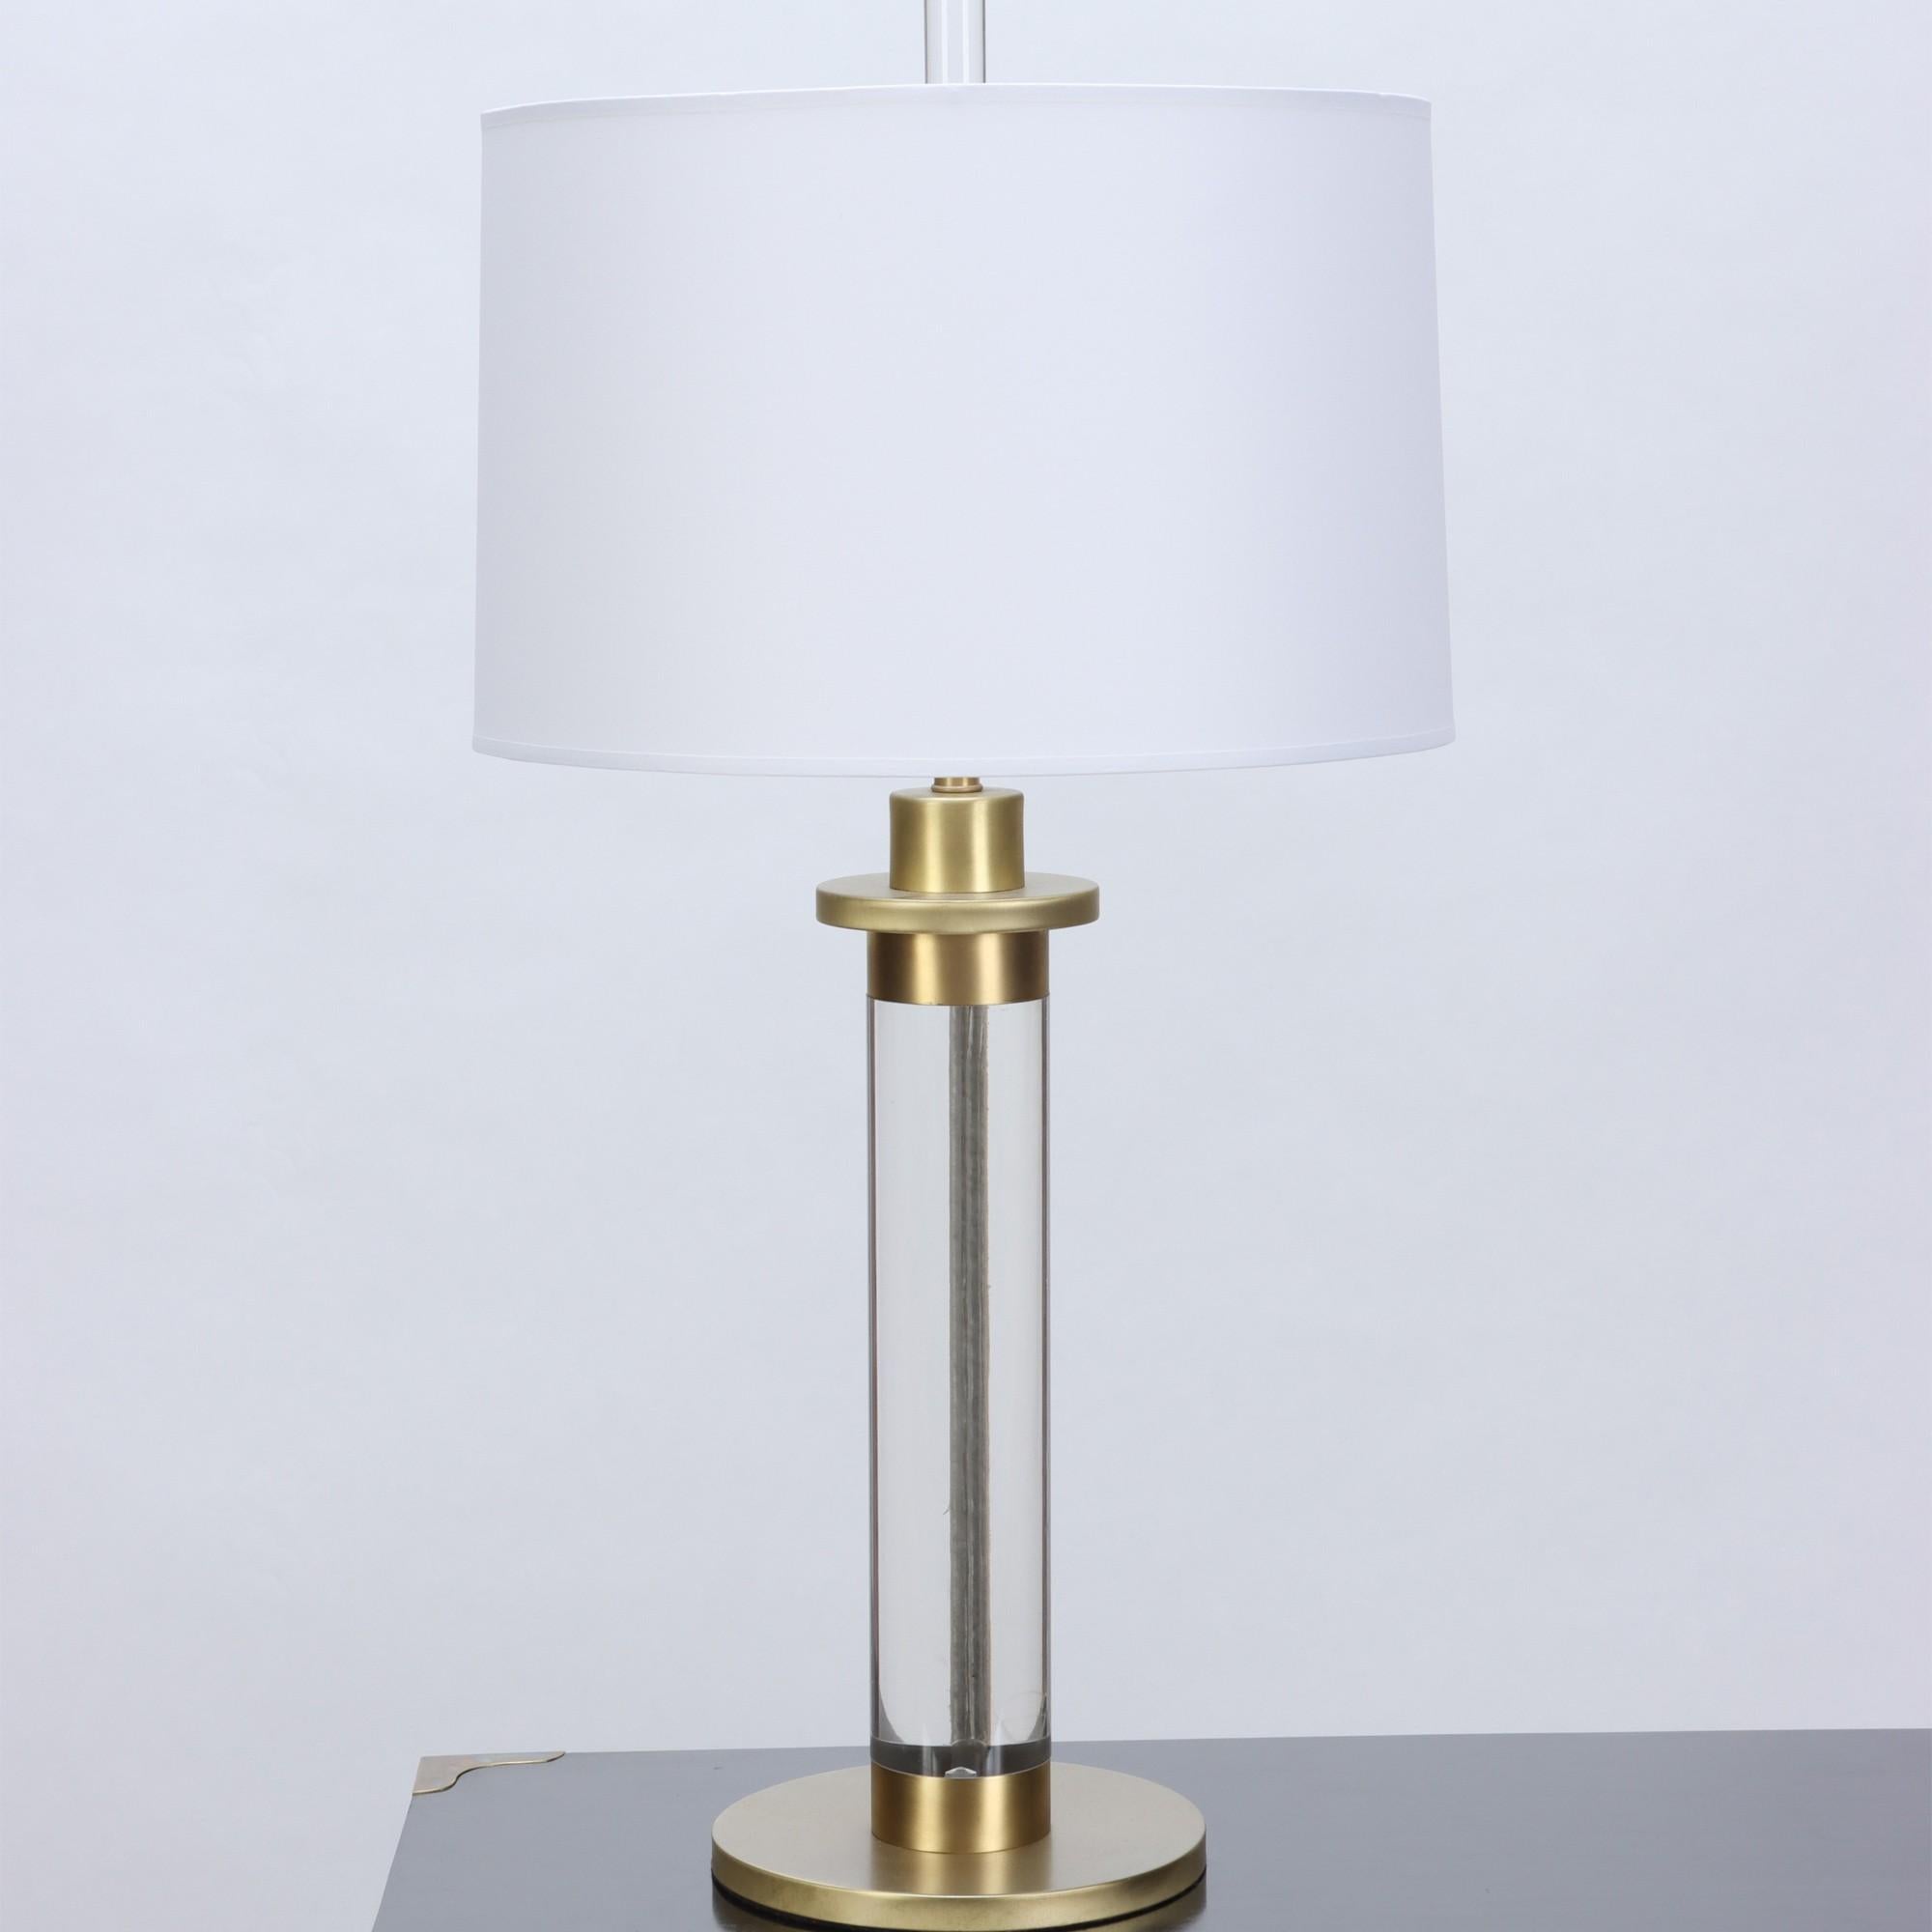 Pair of Modern Lucite Brass Column Table Lamps, circa 1950 For Sale 4